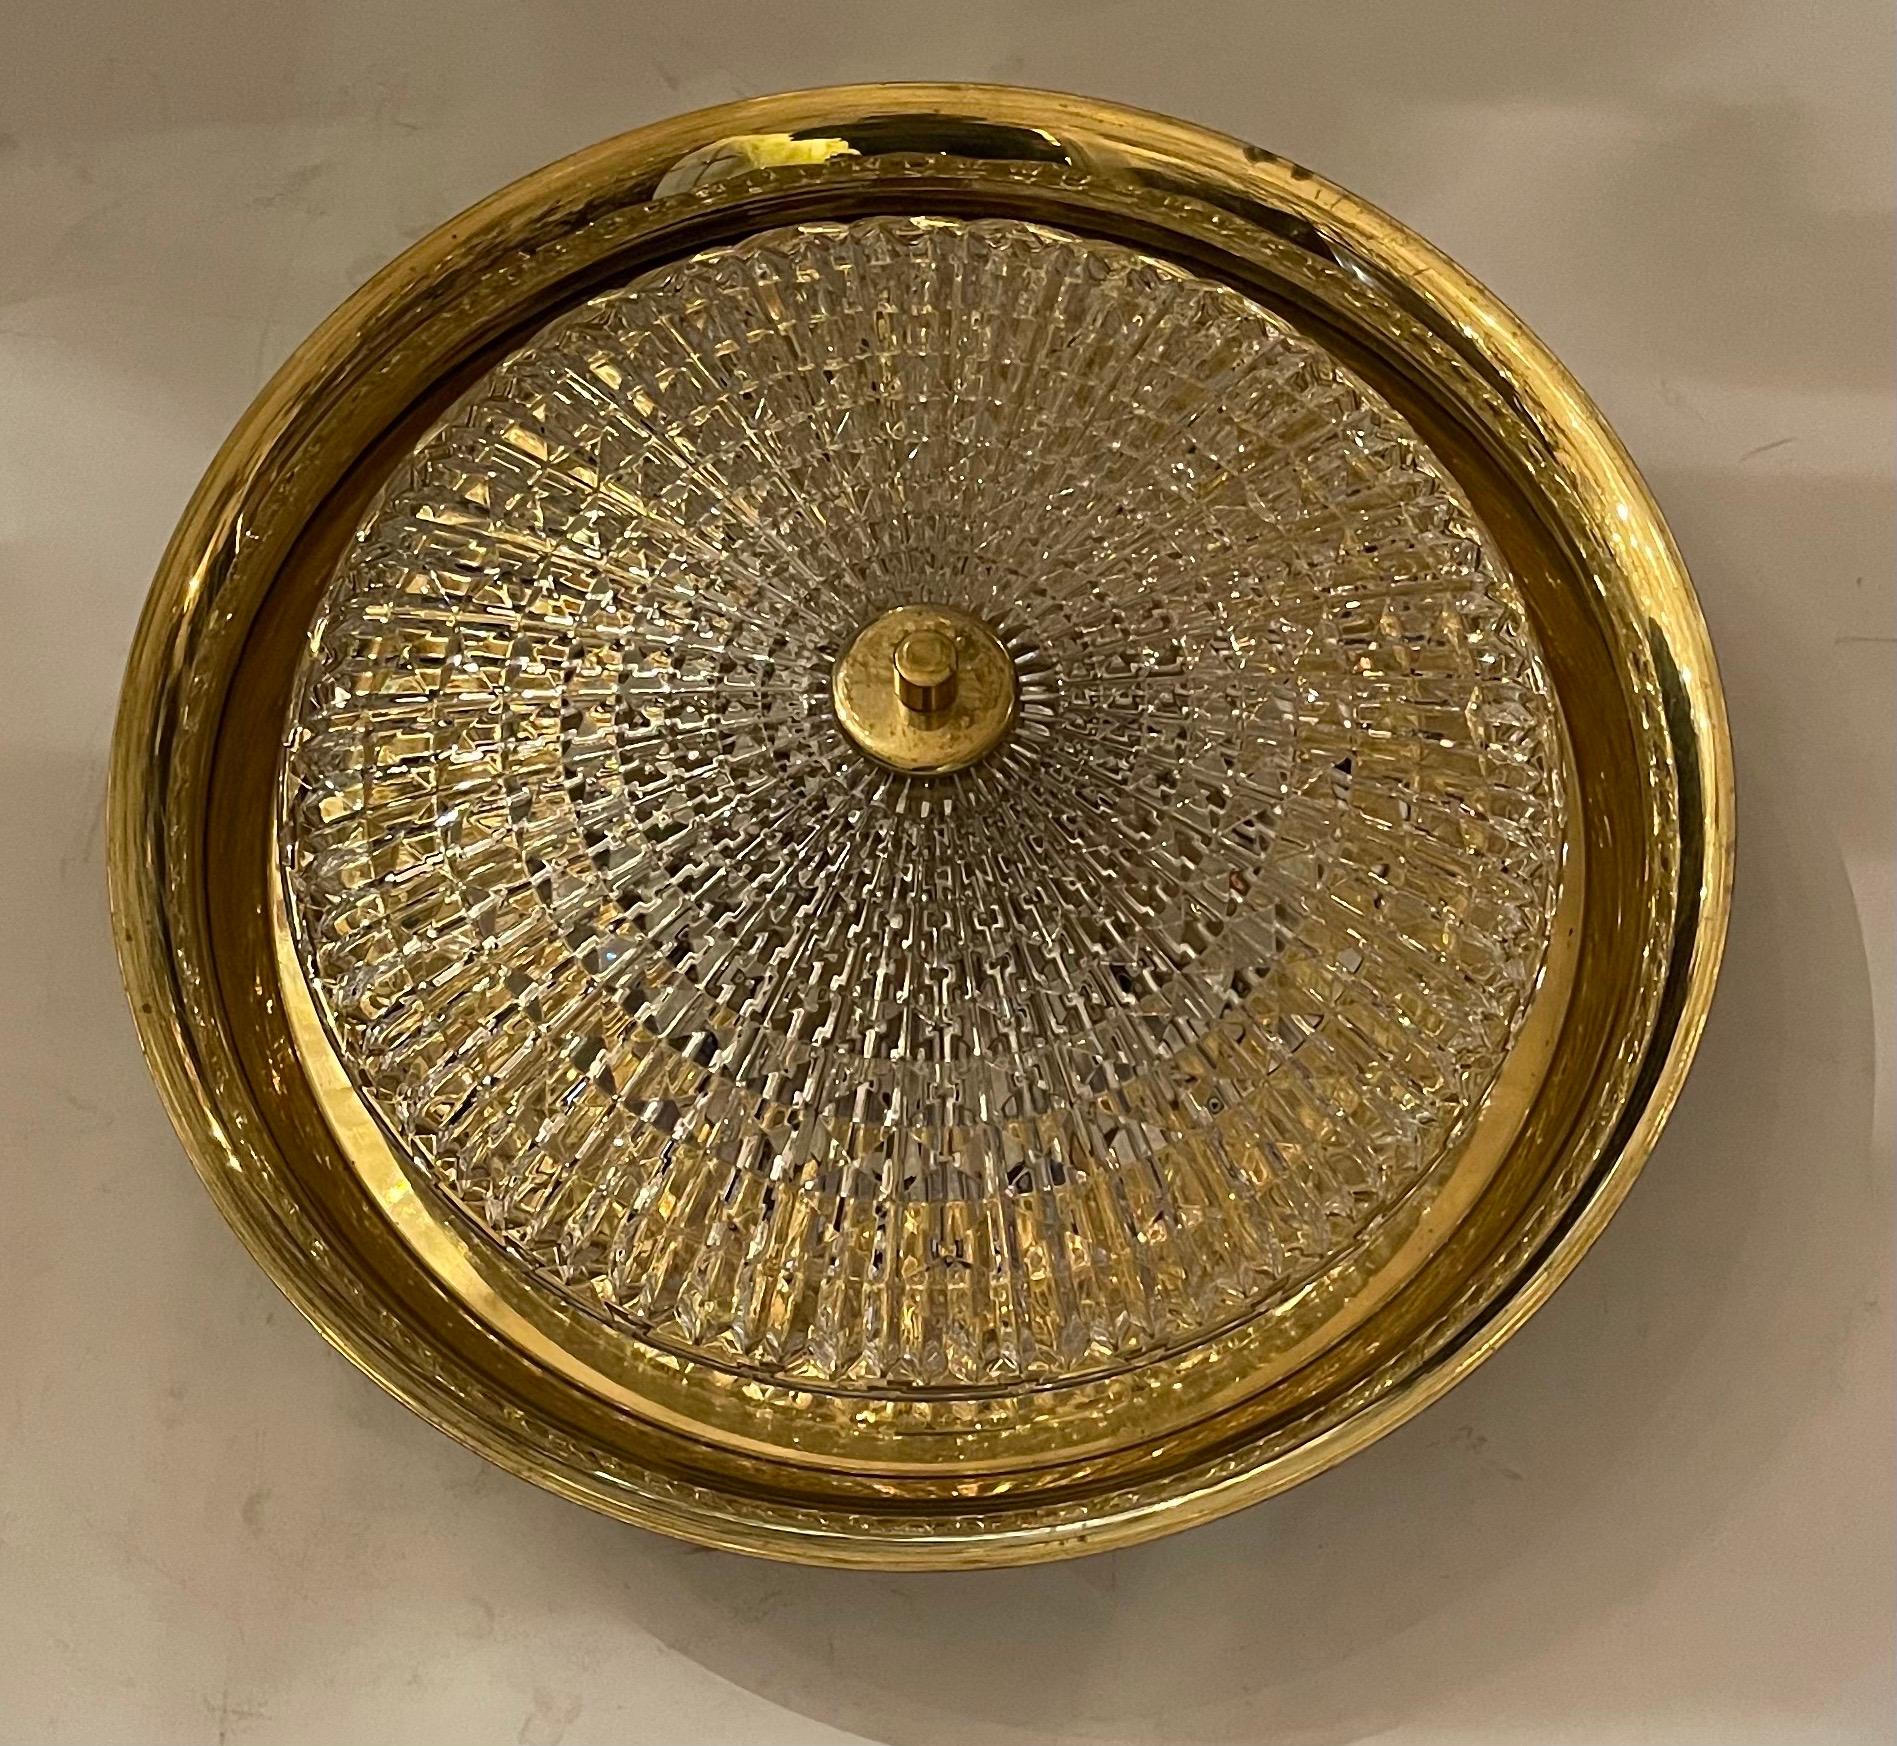 A beautiful Scandinavian Modern brass and textured glass light fixture by Carl Fagerlund for Orrefors/Lyfa, Sweden, manufactured in mid century, circa 1960. It can be used as wall or ceiling fixture.
The light has five candelabra sockets for small